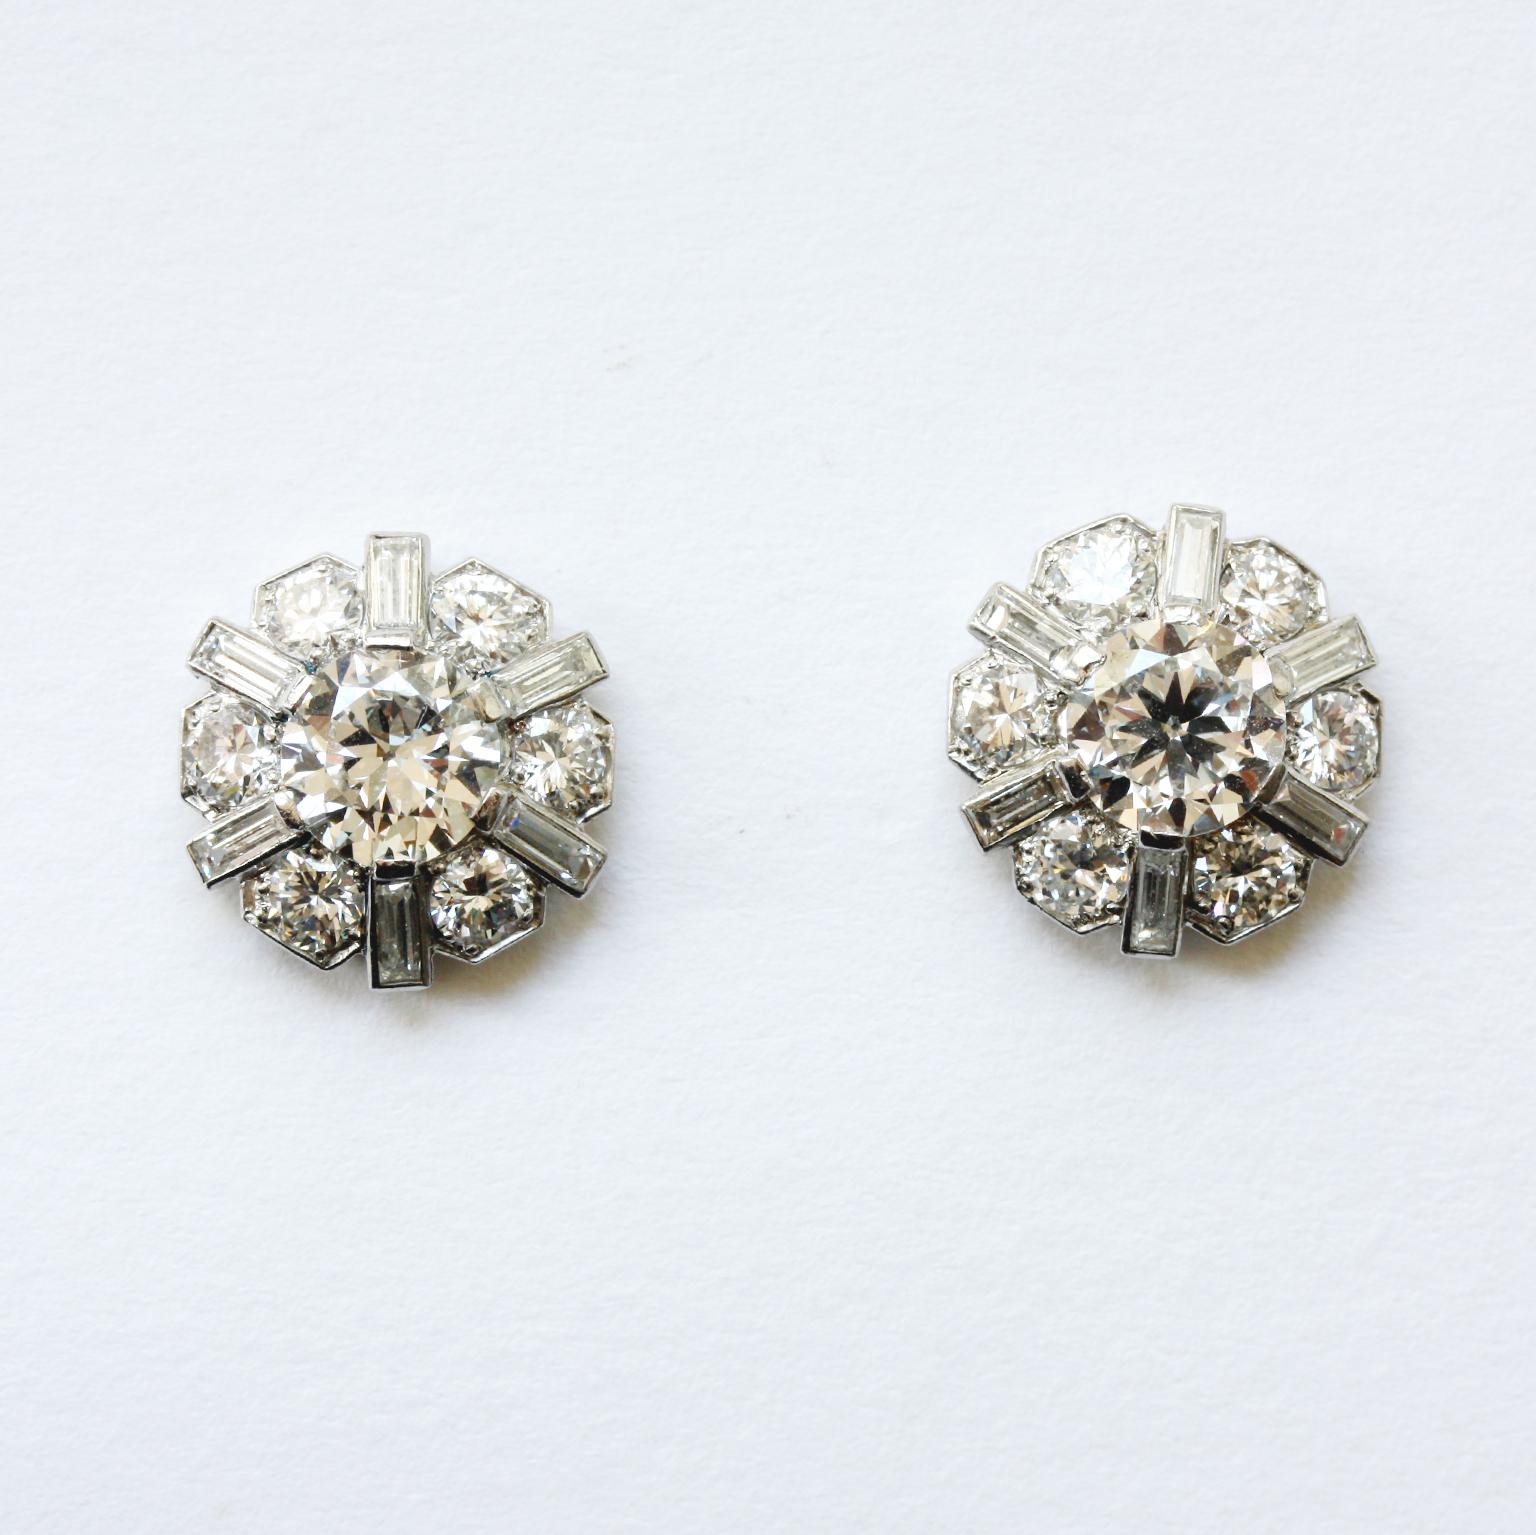 A beautiful pair of platinum stud earrings set with an old-cut diamond (centre stones app 0.95 and 0.98 carat) around which are 6 smaller old-cut diamonds and 6 baguette-cut diamonds (app. 4.3 carats in total, colour I-J, VS1). Circa 1950.

Weight: